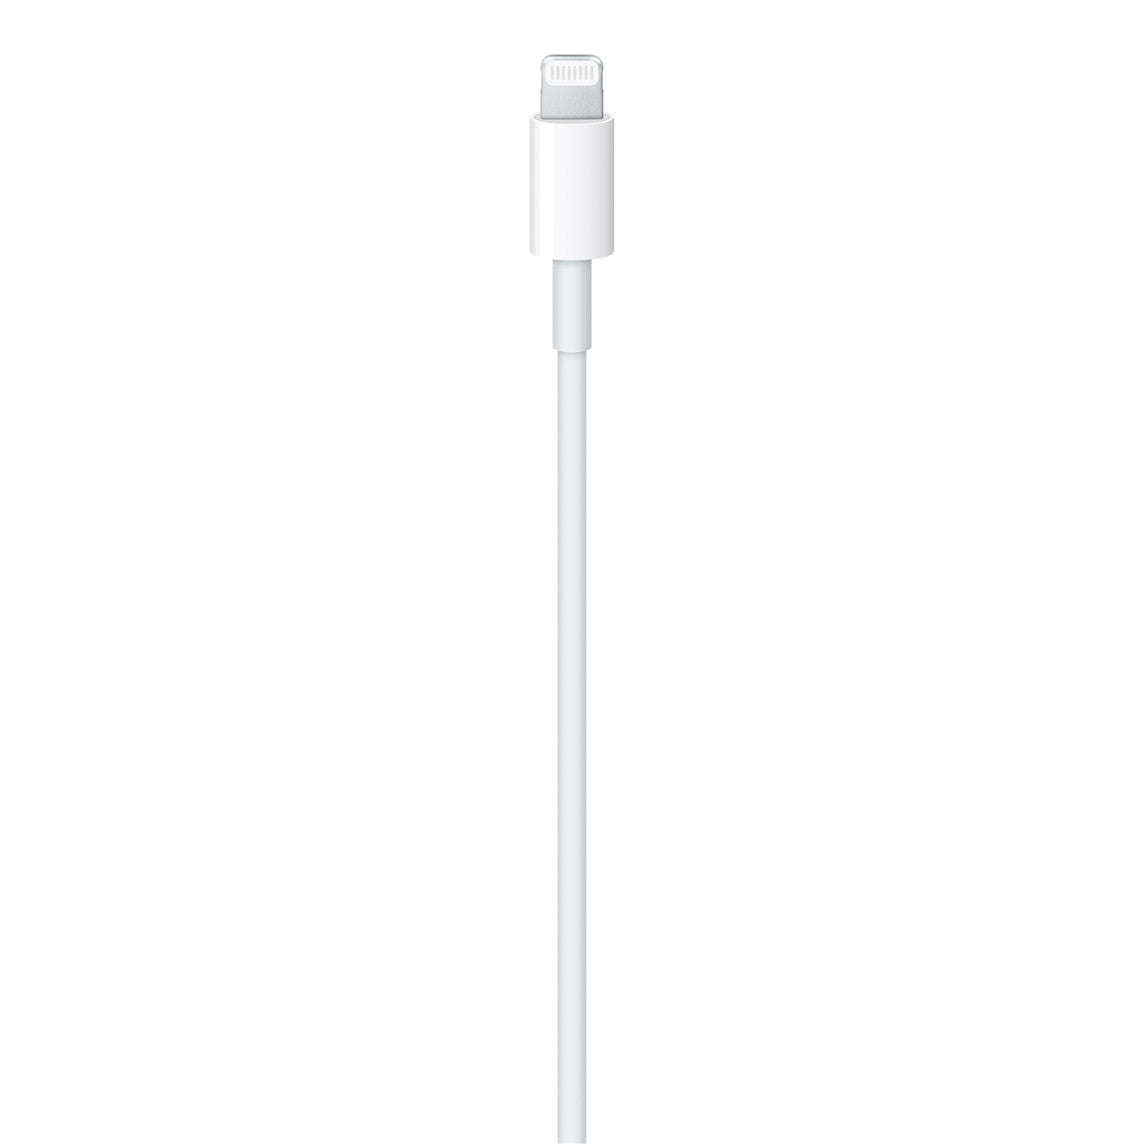 Apple MacBook 96W Charger A2166 with Apple USB-C Charge Cable